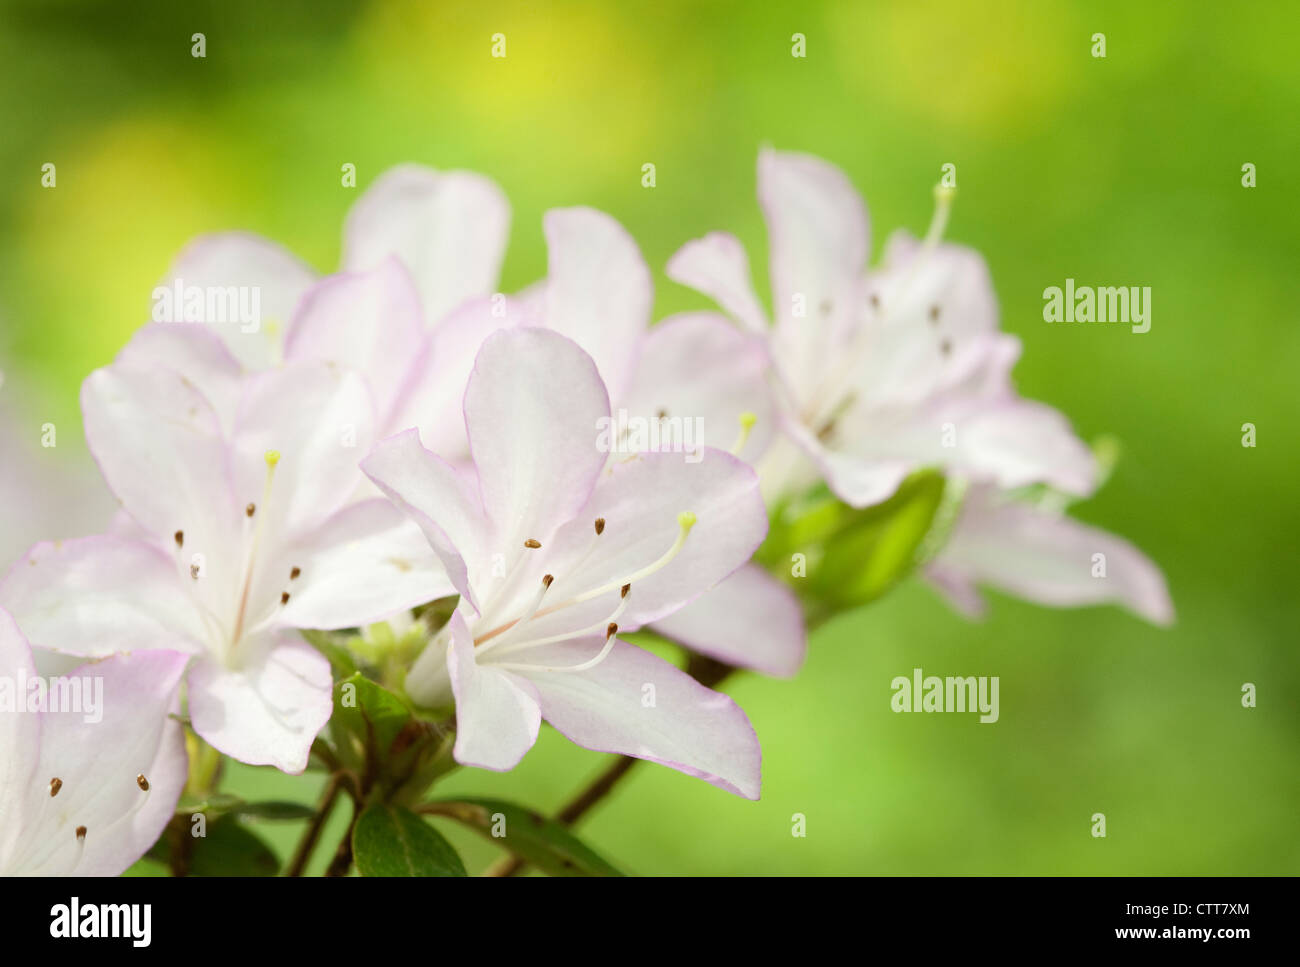 Rhododendron cultivar, Rhododendron, Purple, Green. Stock Photo